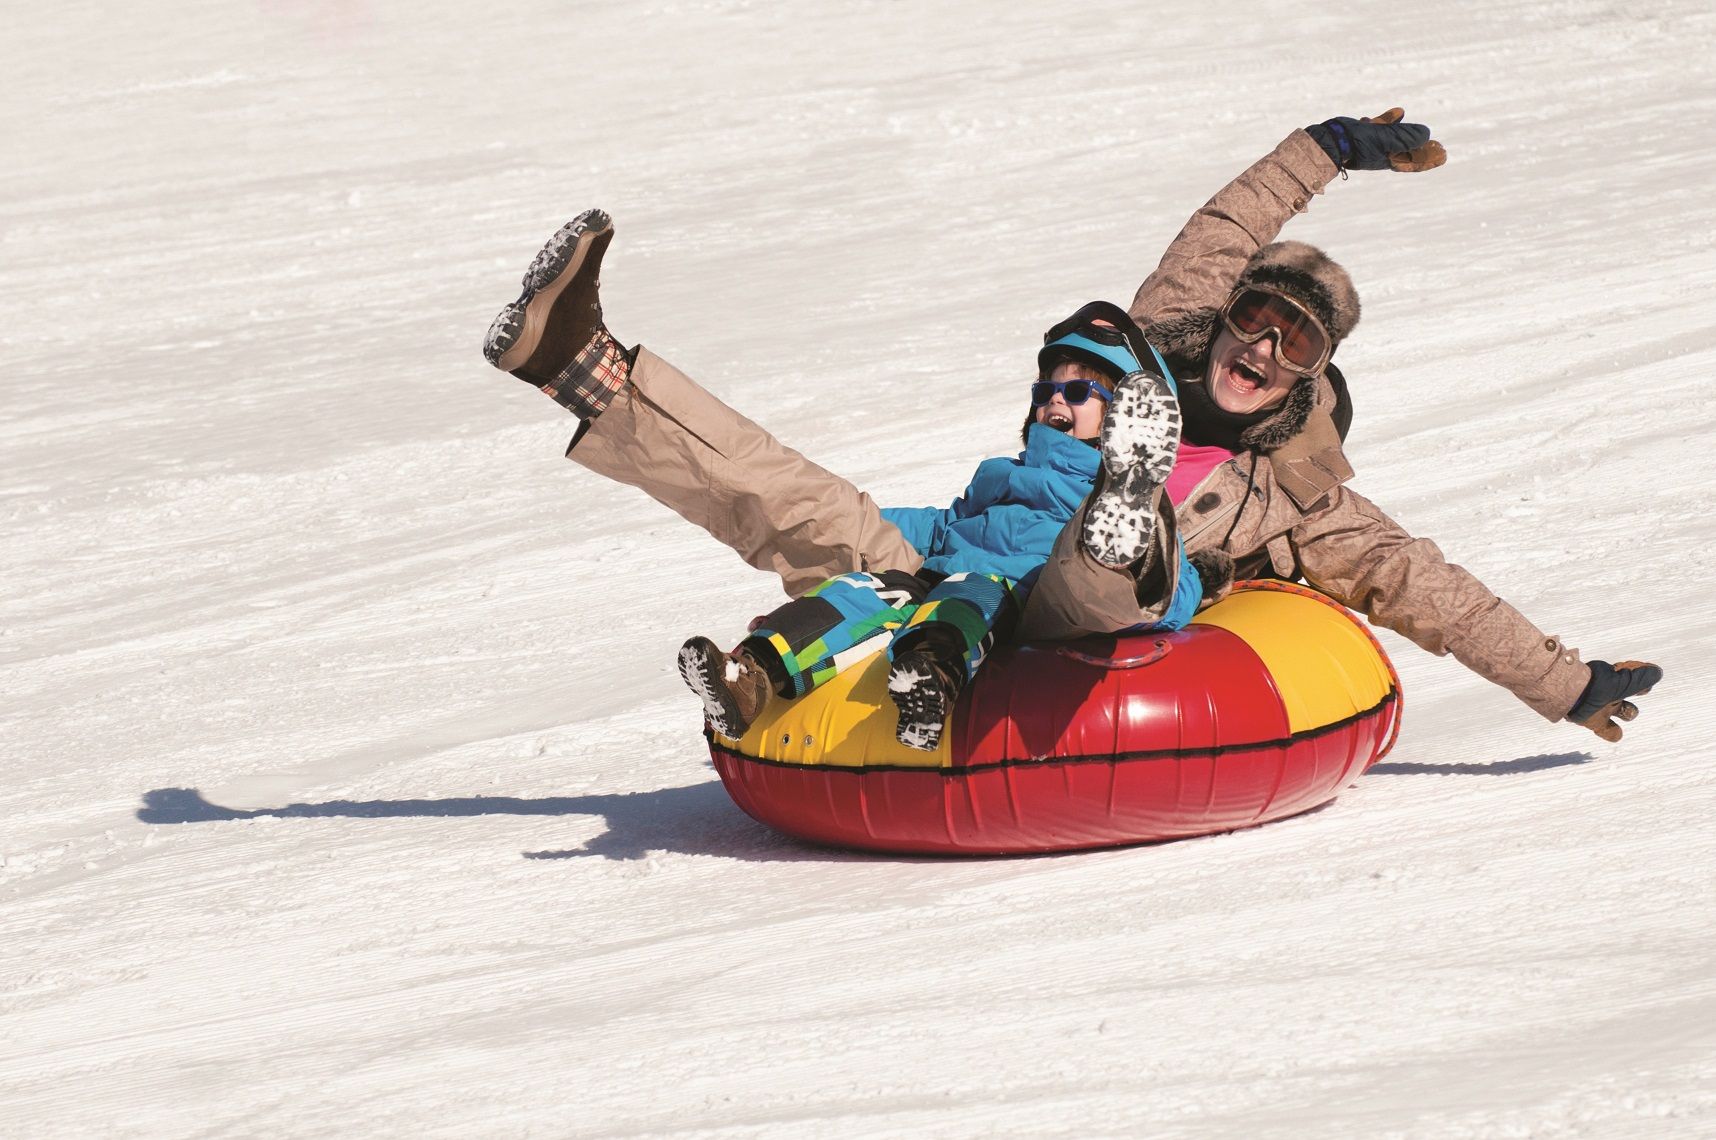 Young woman and little boy having fun in snow tube